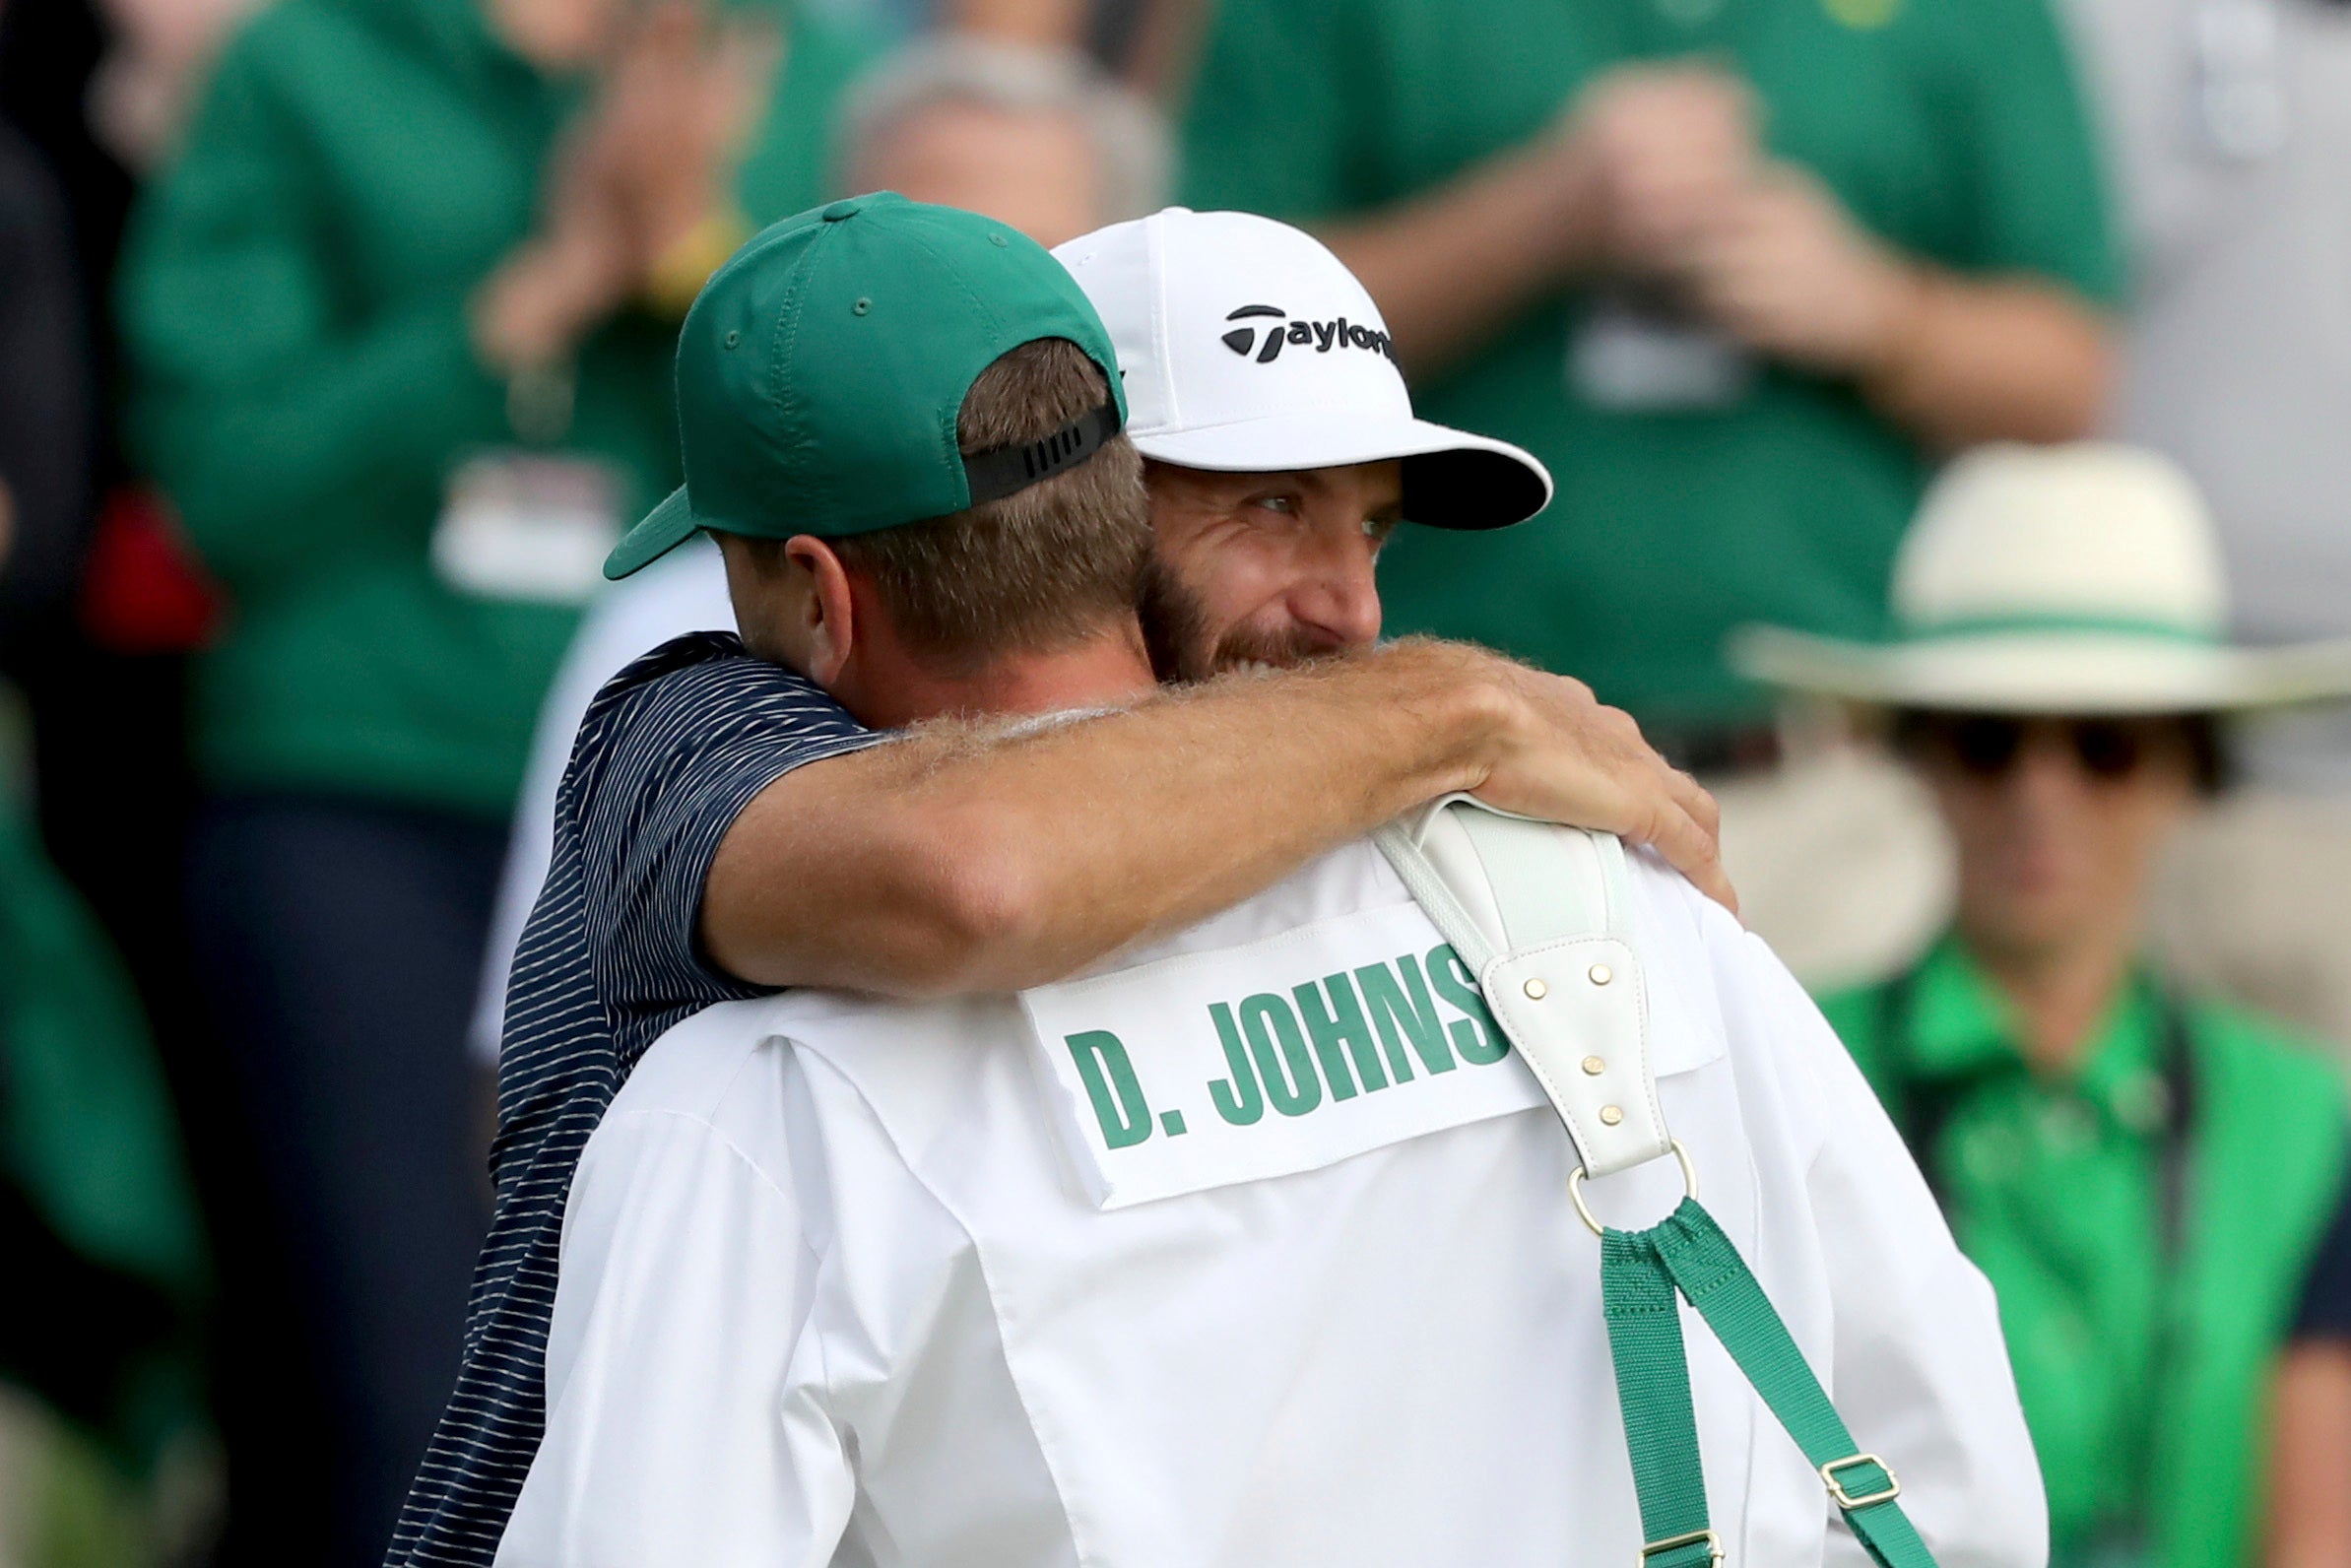 Dustin Johnson shared his victory with brother and caddie Austin